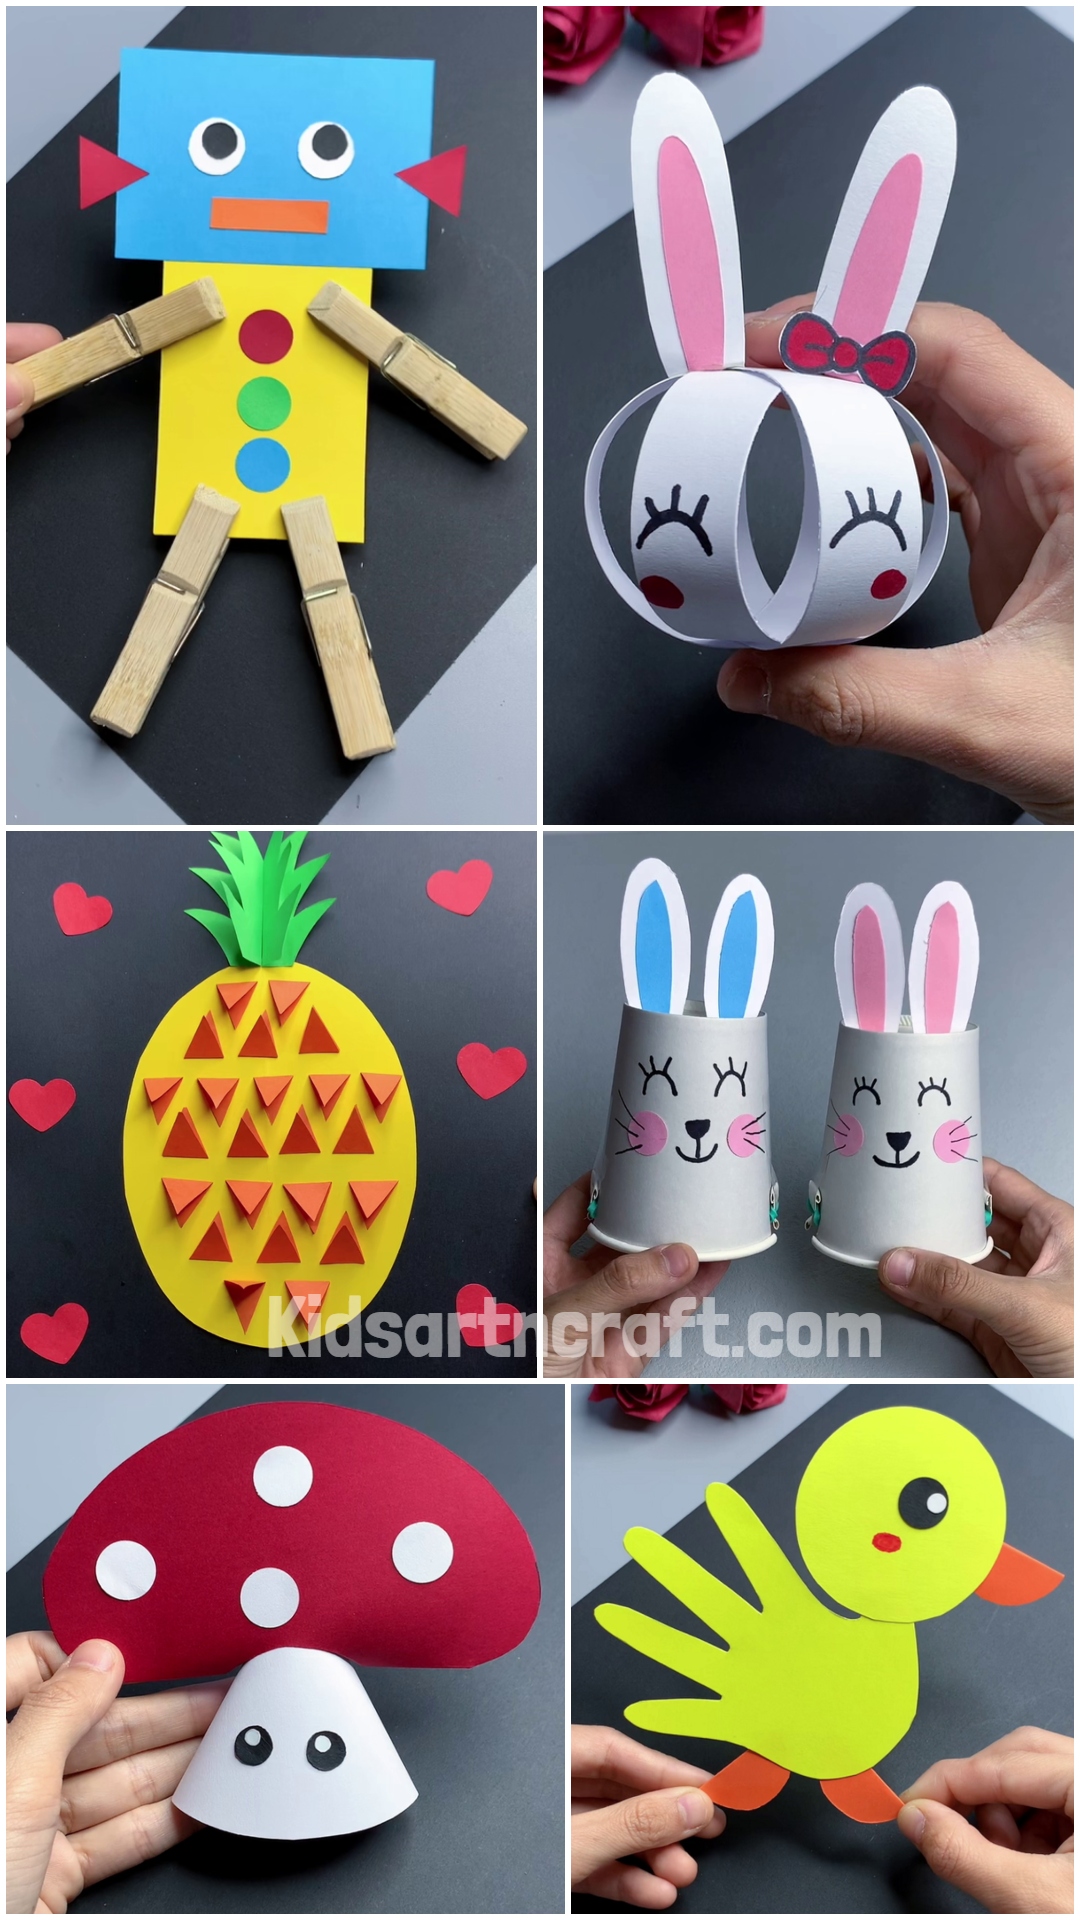 Simple Paper Crafts For Kids You'll Want To Make Too!